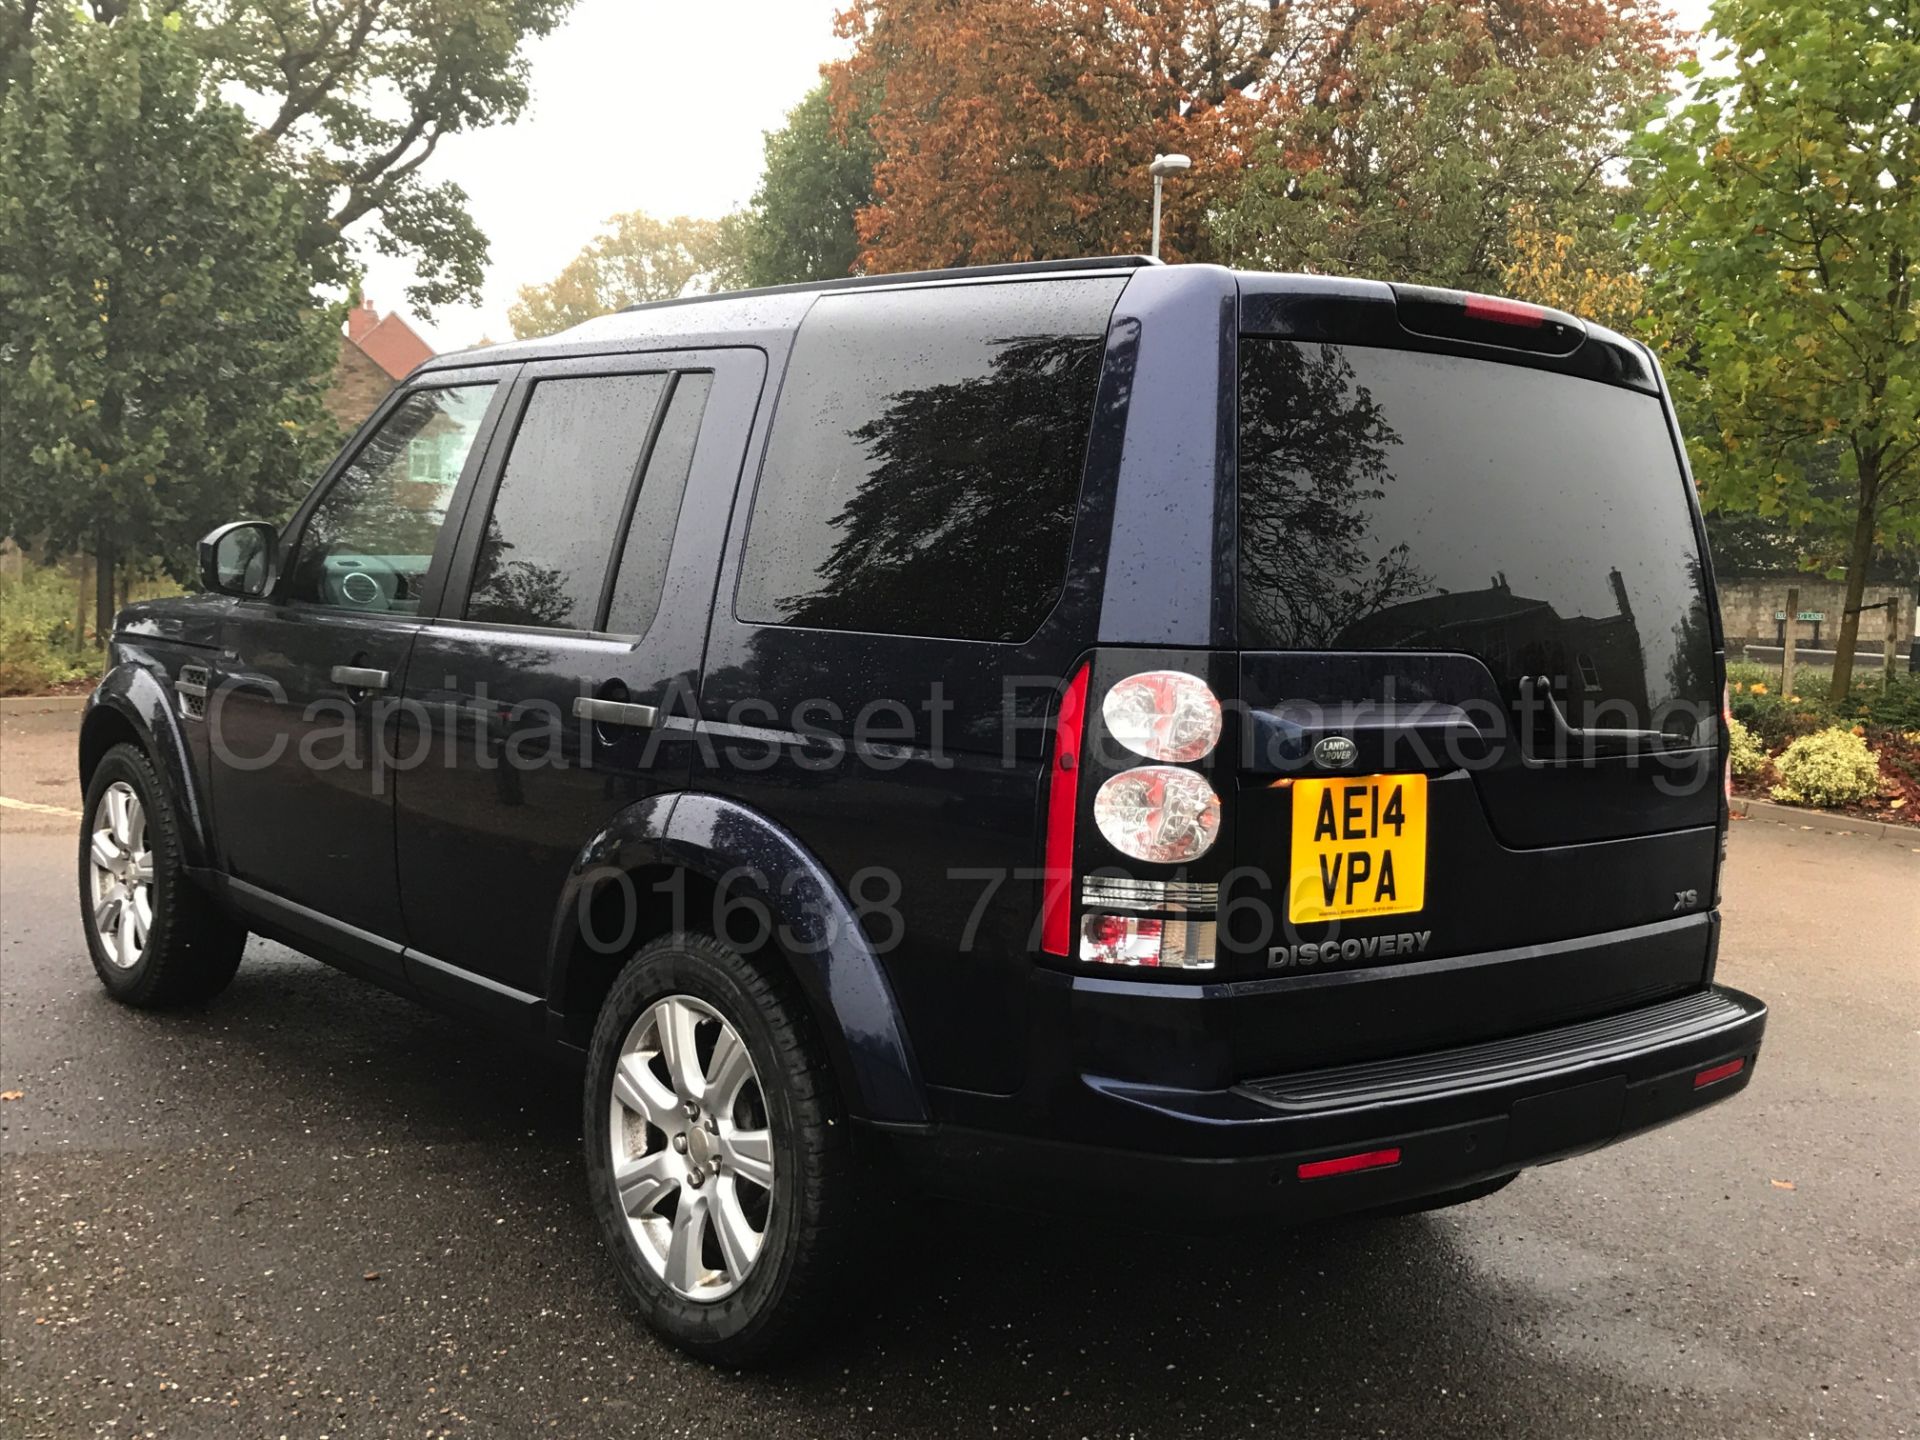 ON SALE LAND ROVER DISCOVERY 4 (2014) '3.0 SDV6 - 8 SPEED AUTO - LEATHER - SAT NAV -7 SEATER'1 OWNER - Image 7 of 41